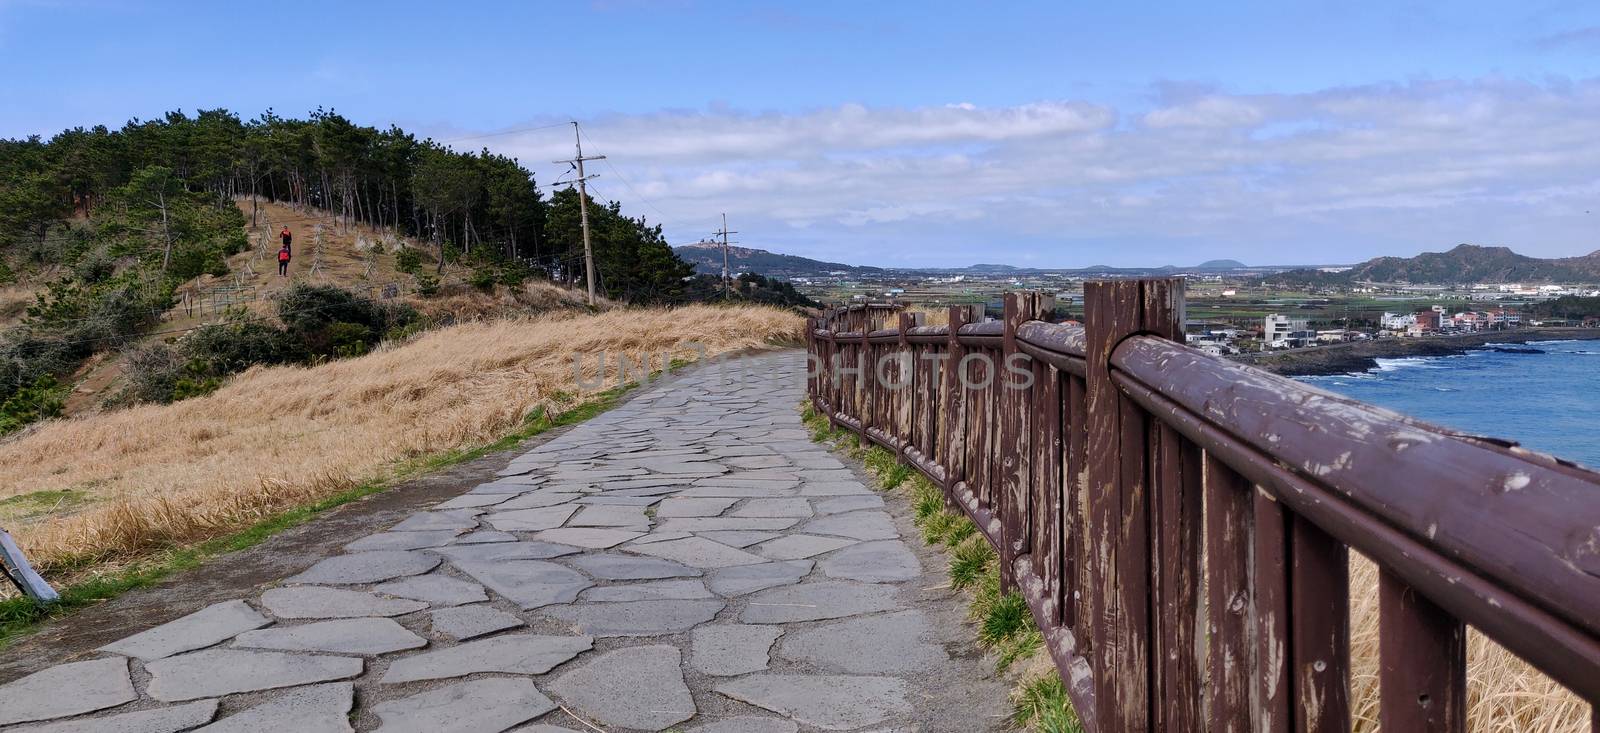 A paved path on the songaksan mountain with fence in Jeju Island, South Korea